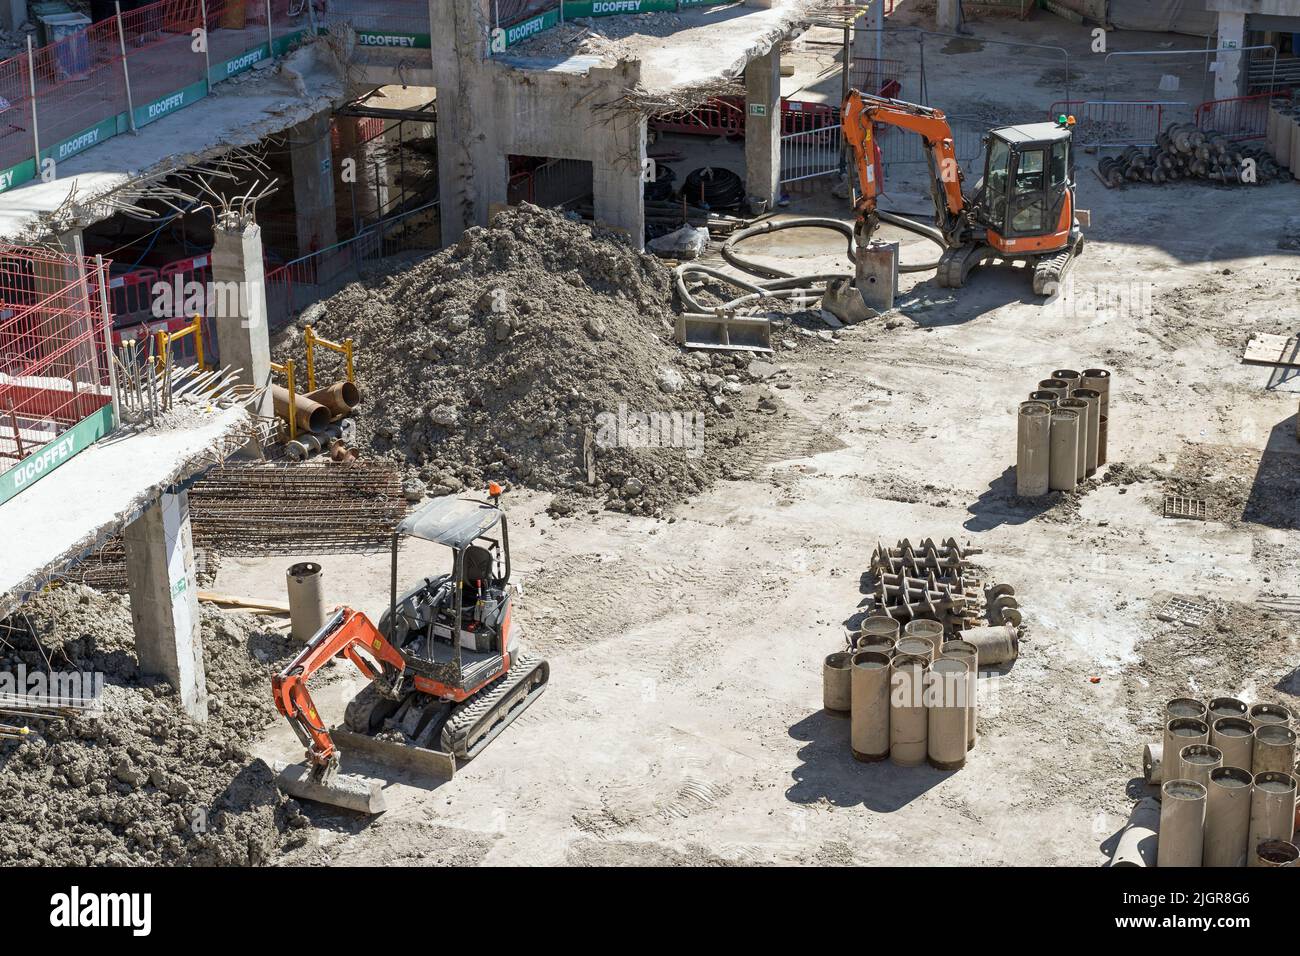 Two mechanical excavators on a construction site surrounded by rubble and piling columns. London - 10th July 2022 Stock Photo